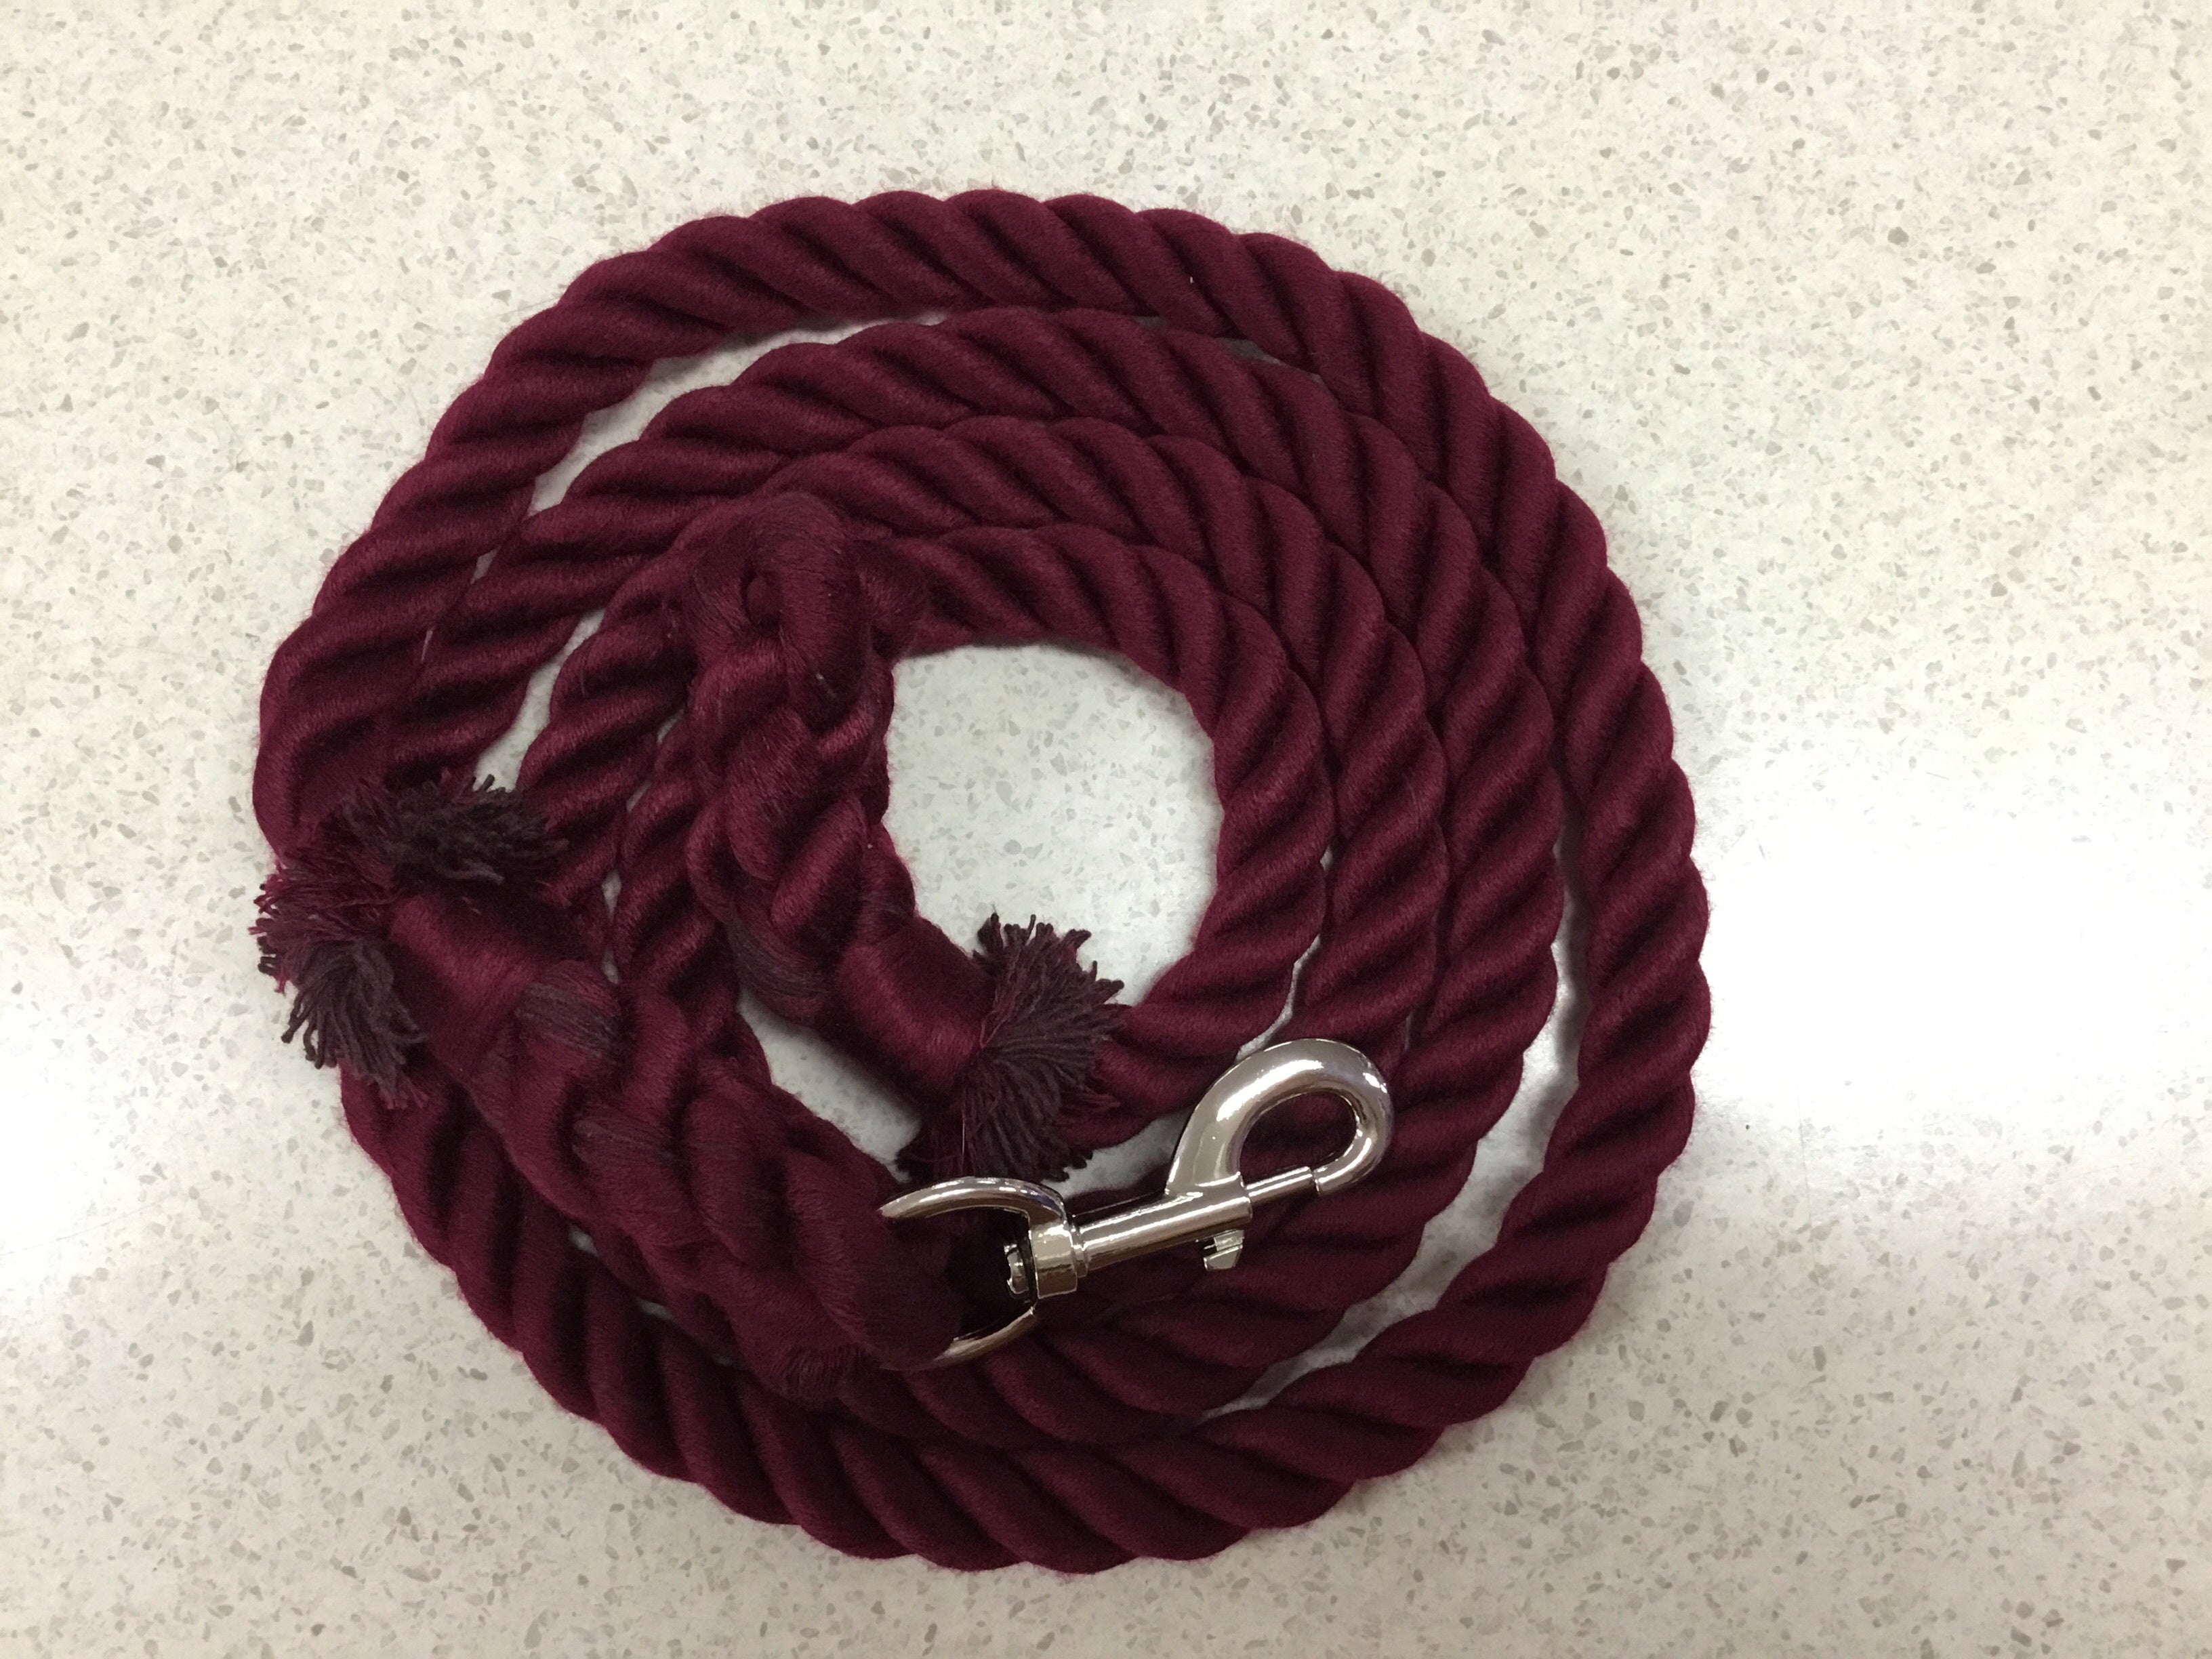 Lead Rope - Cotton